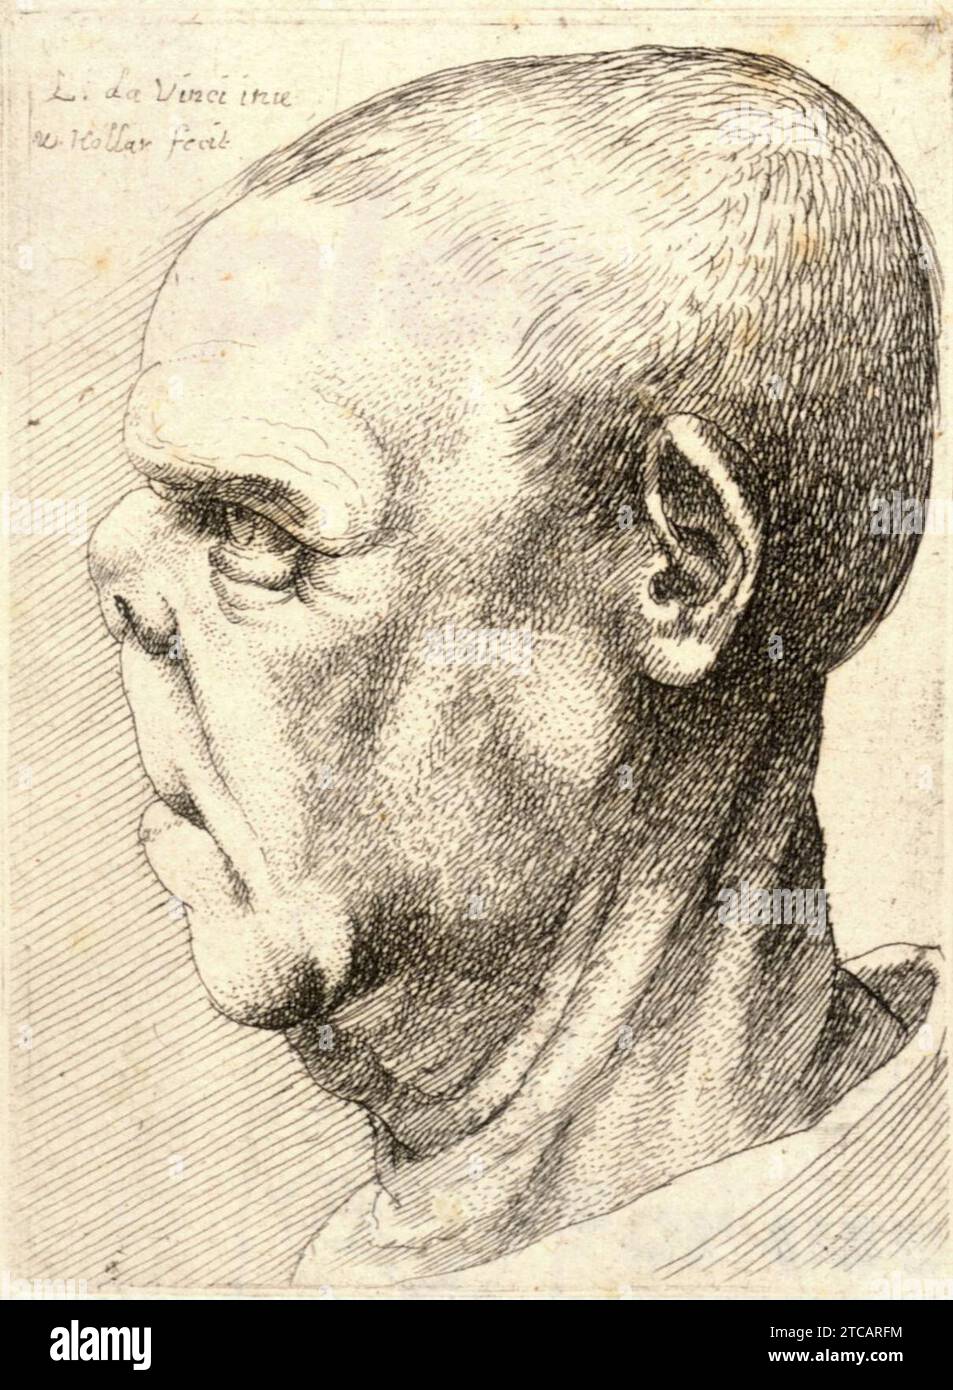 Wenceslas Hollar - Man with flattened nose and elongated upper lip. Stock Photo